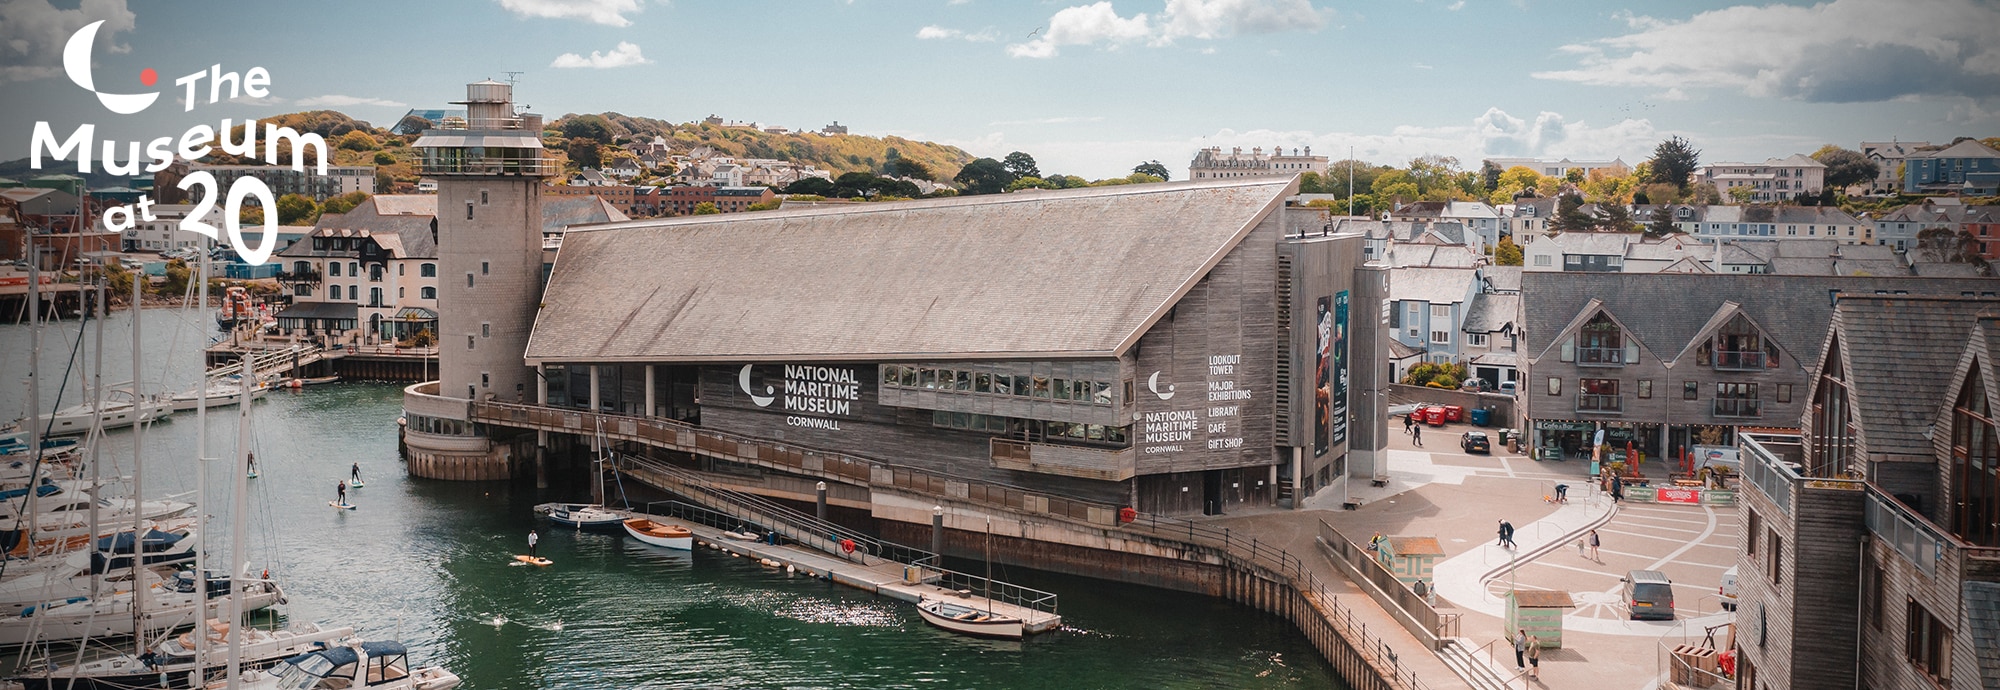 An aerial shot of National Maritime Museum Cornwall with Discovery Quay to the right and the harbour to the left. 'The Museum at 20' is written in the top left.